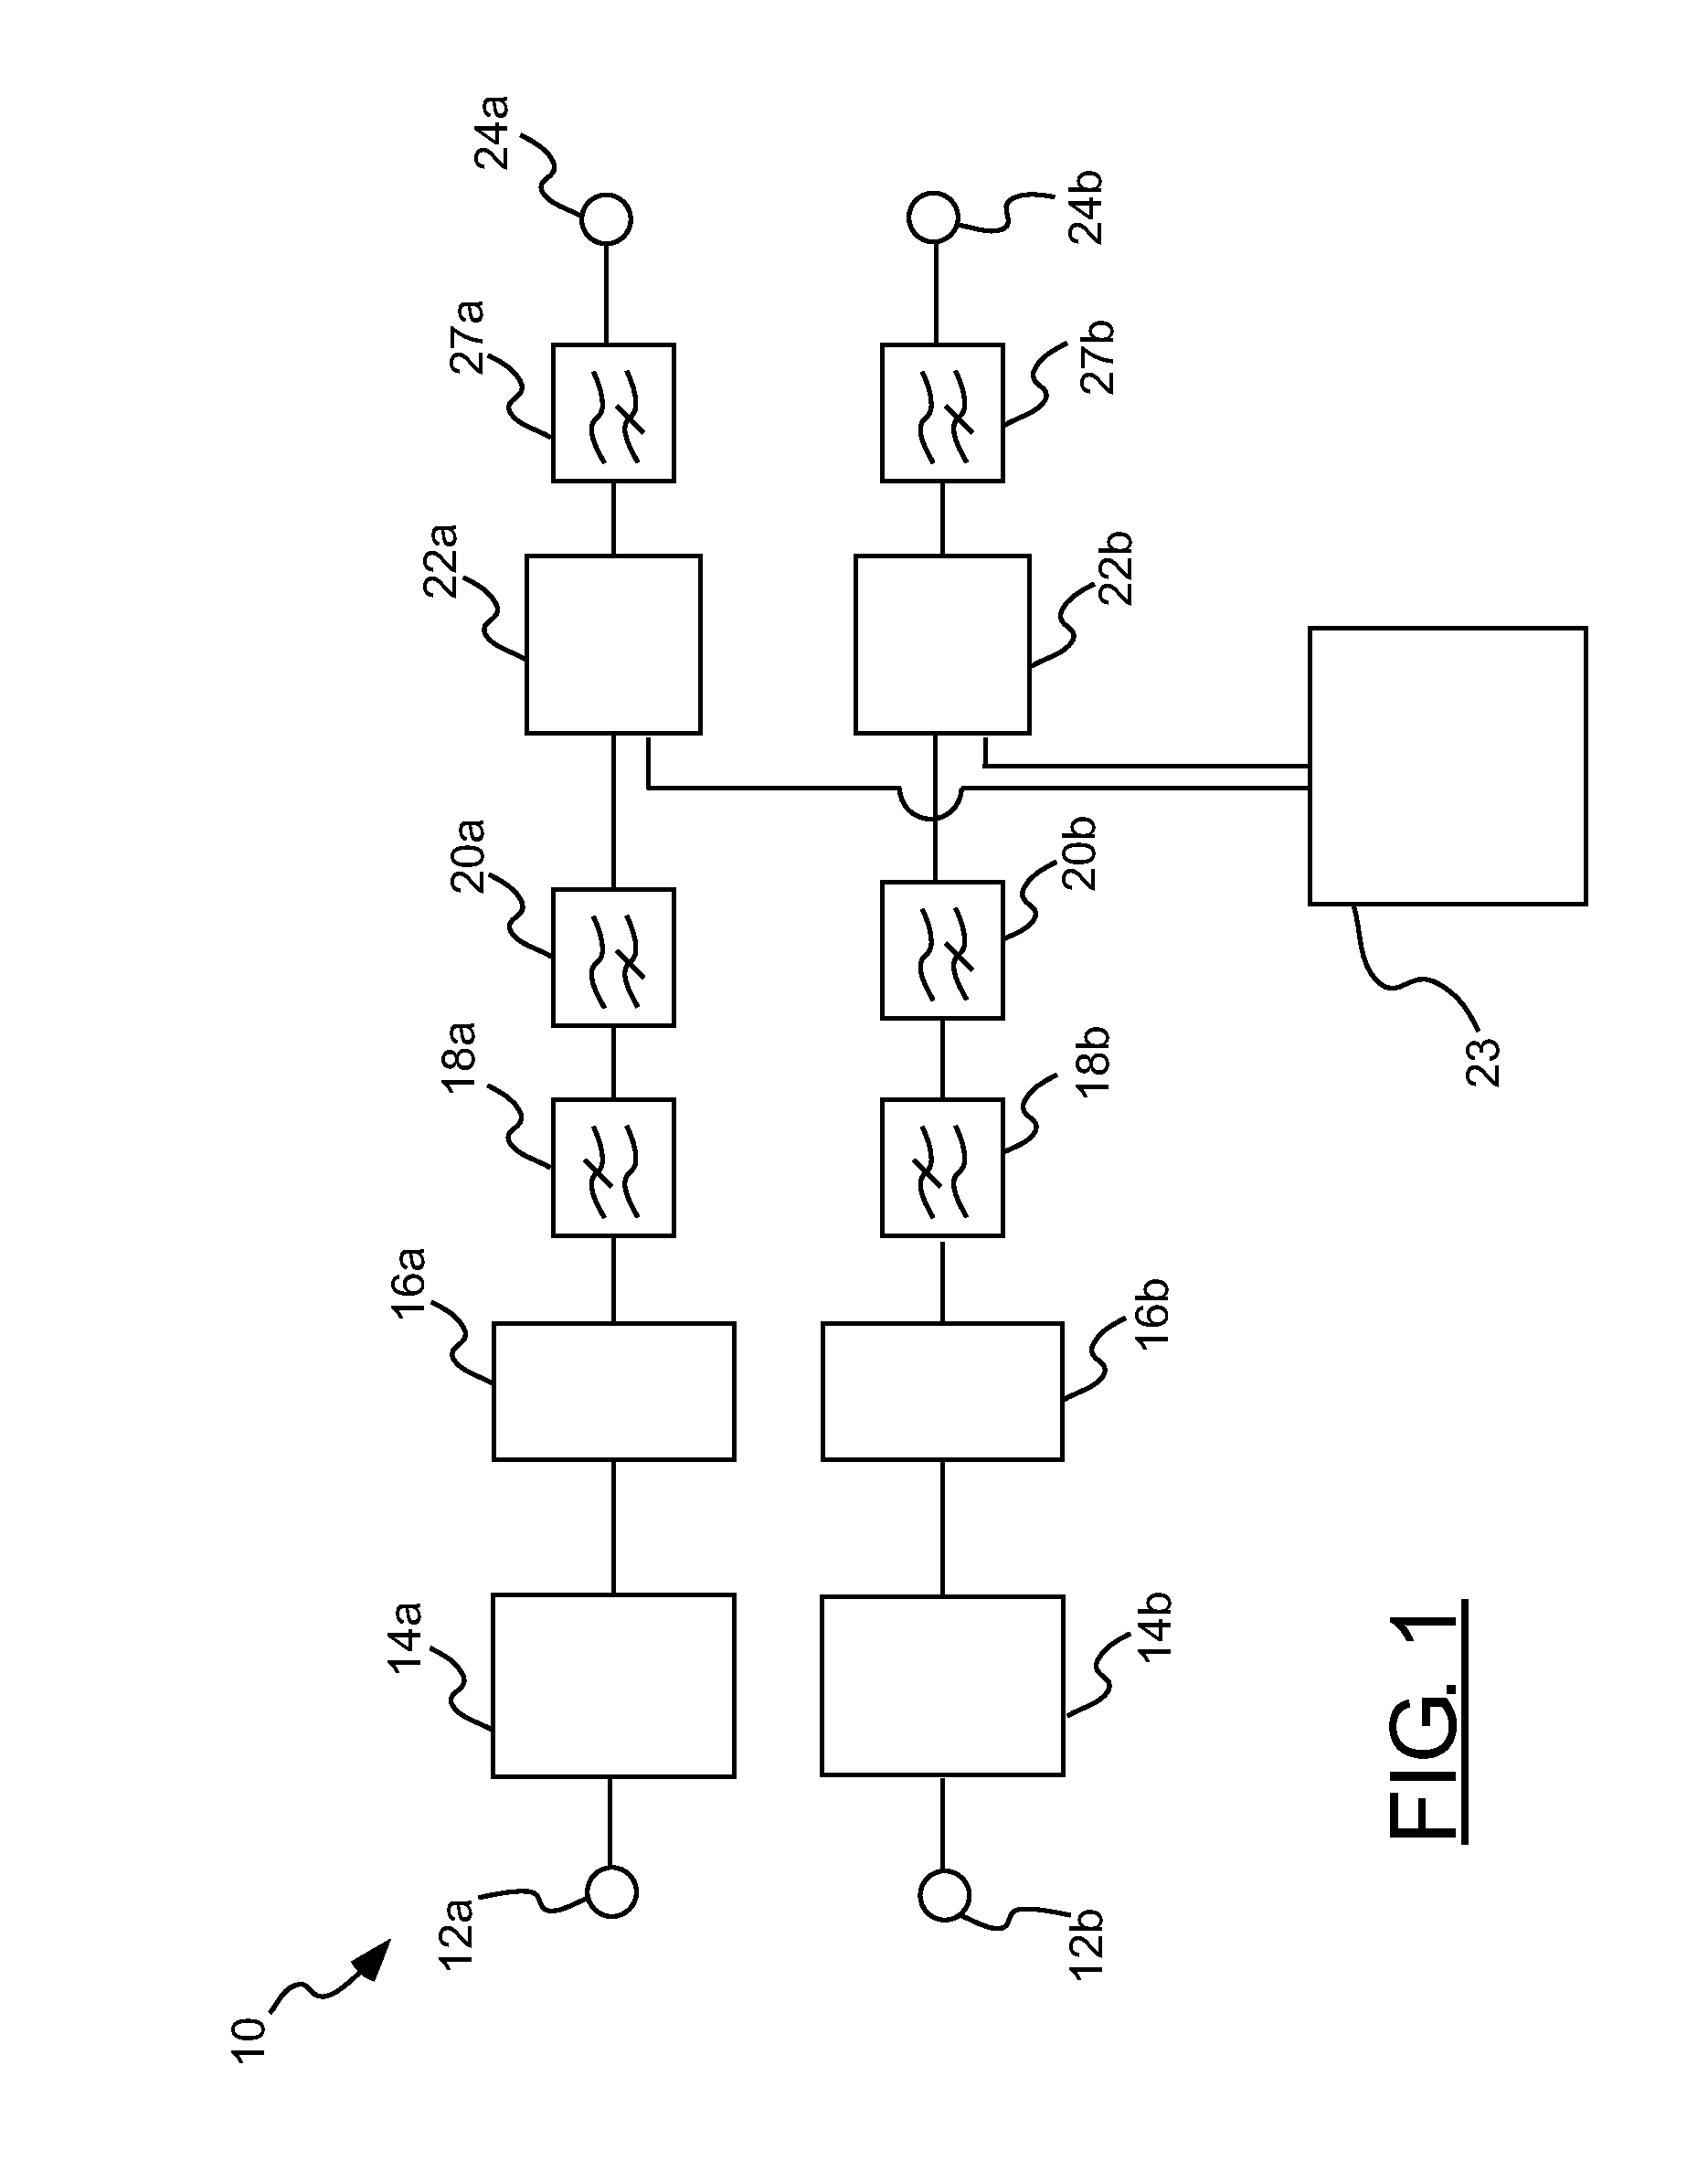 Parametric signal processing systems and methods